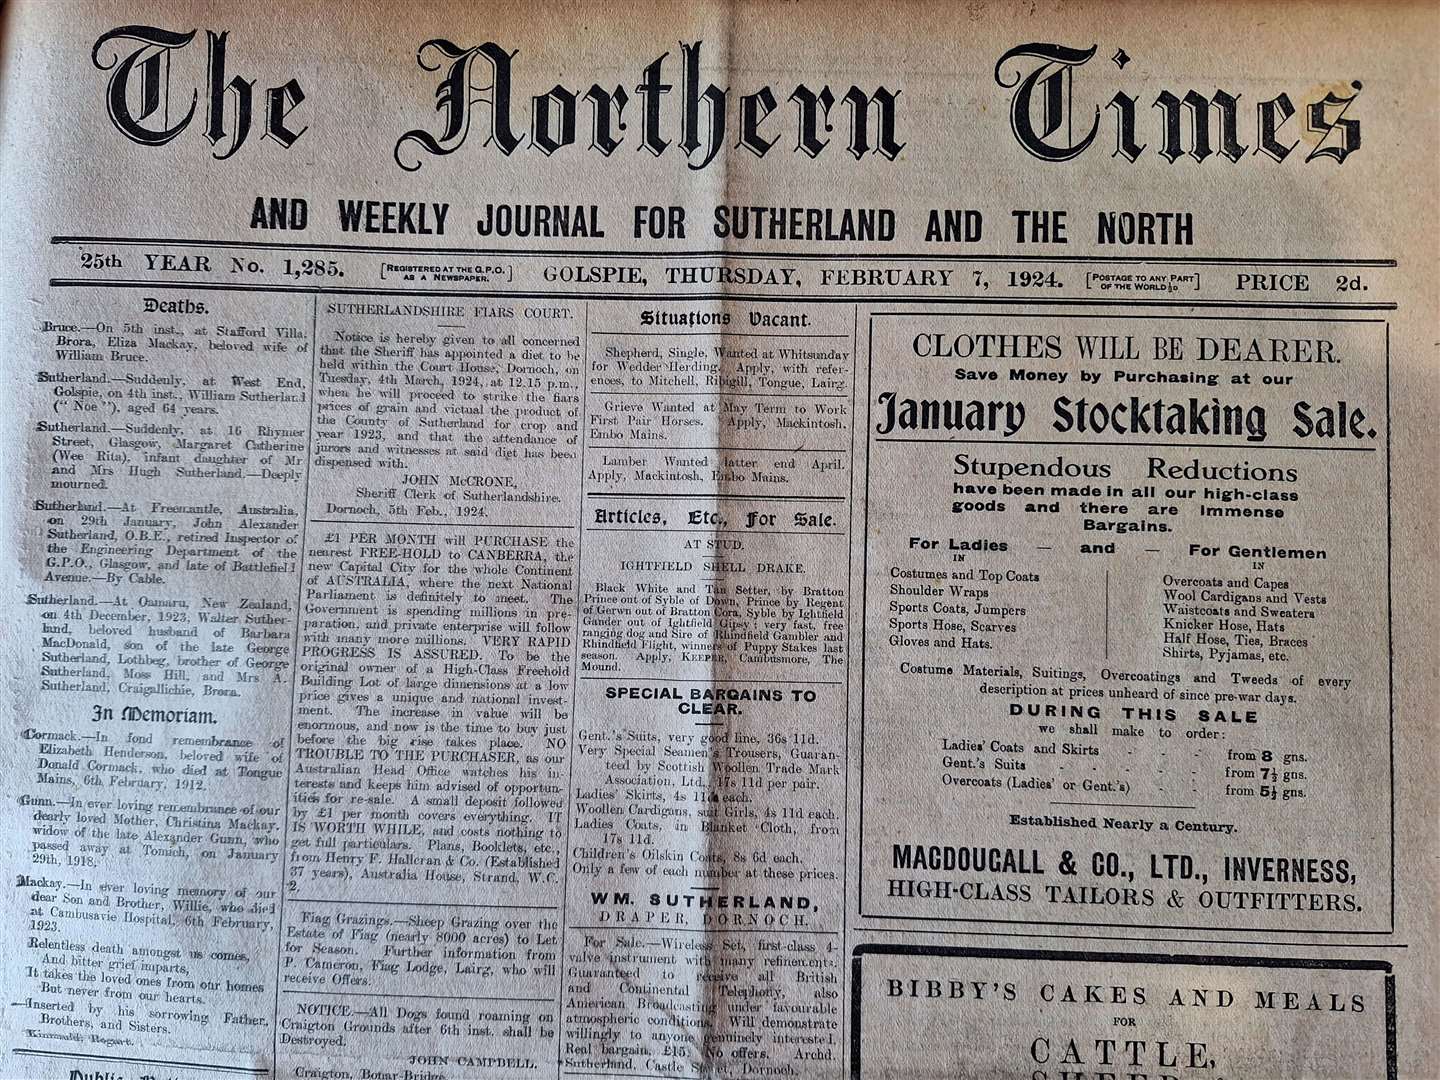 The edition of February 7, 1924.